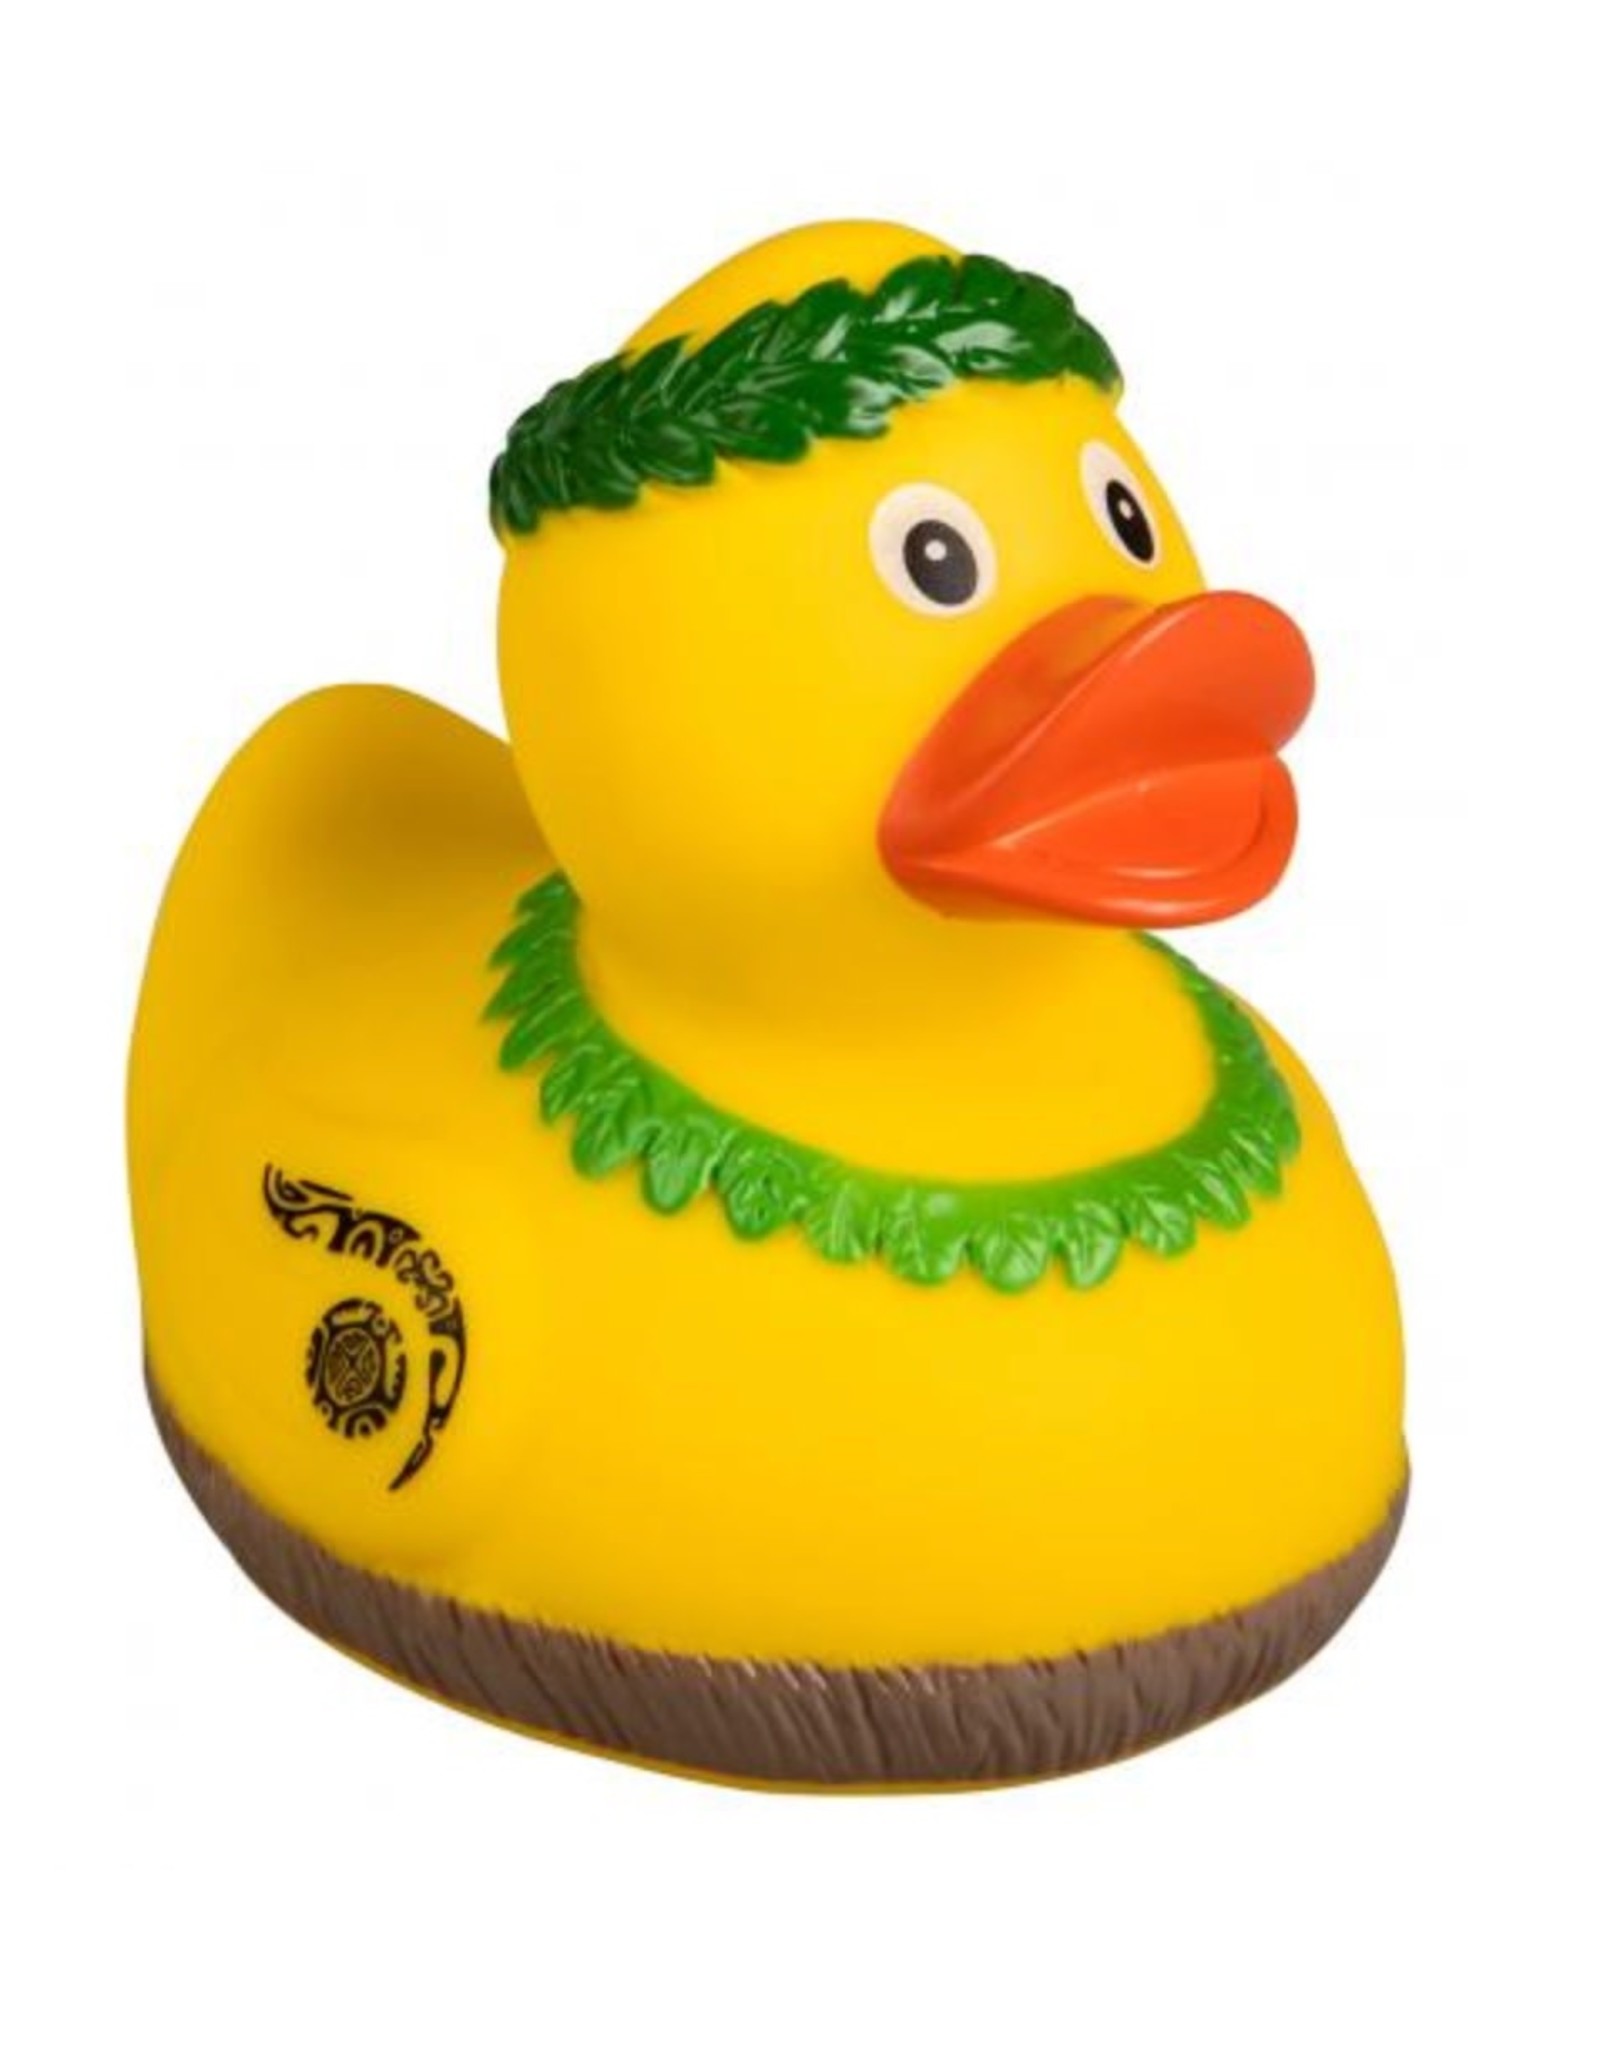 LARGE RUBBER DUCK - Whoola Toys